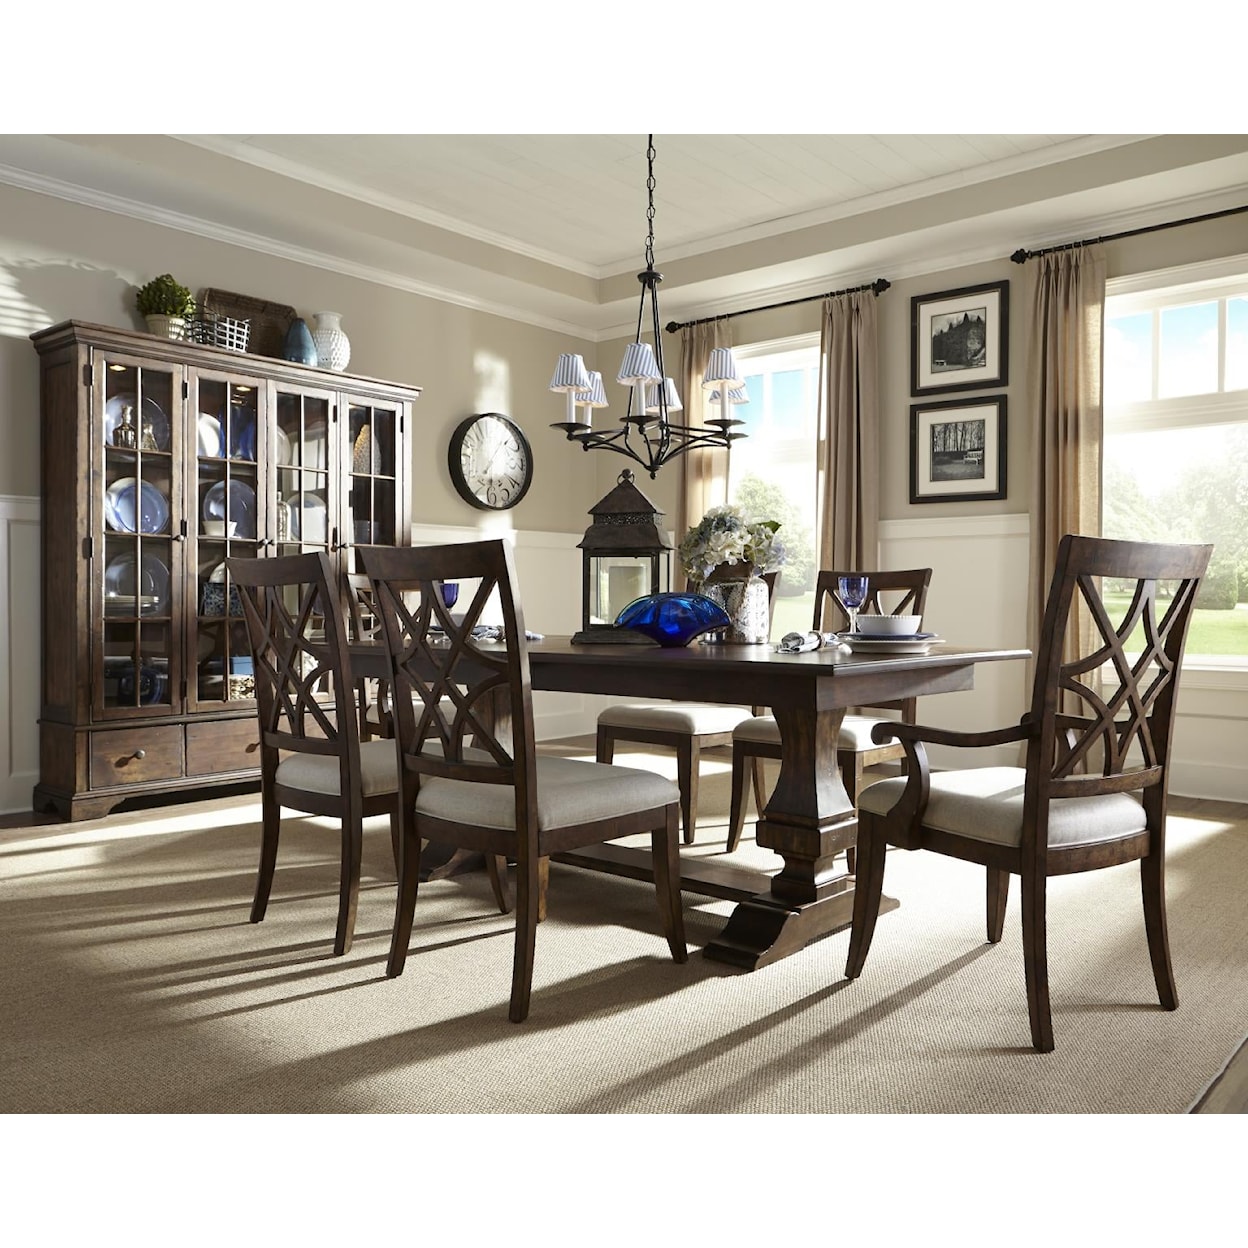 Trisha Yearwood Home Collection by Legacy Classic Trisha Yearwood Home 7-Piece Dining Set